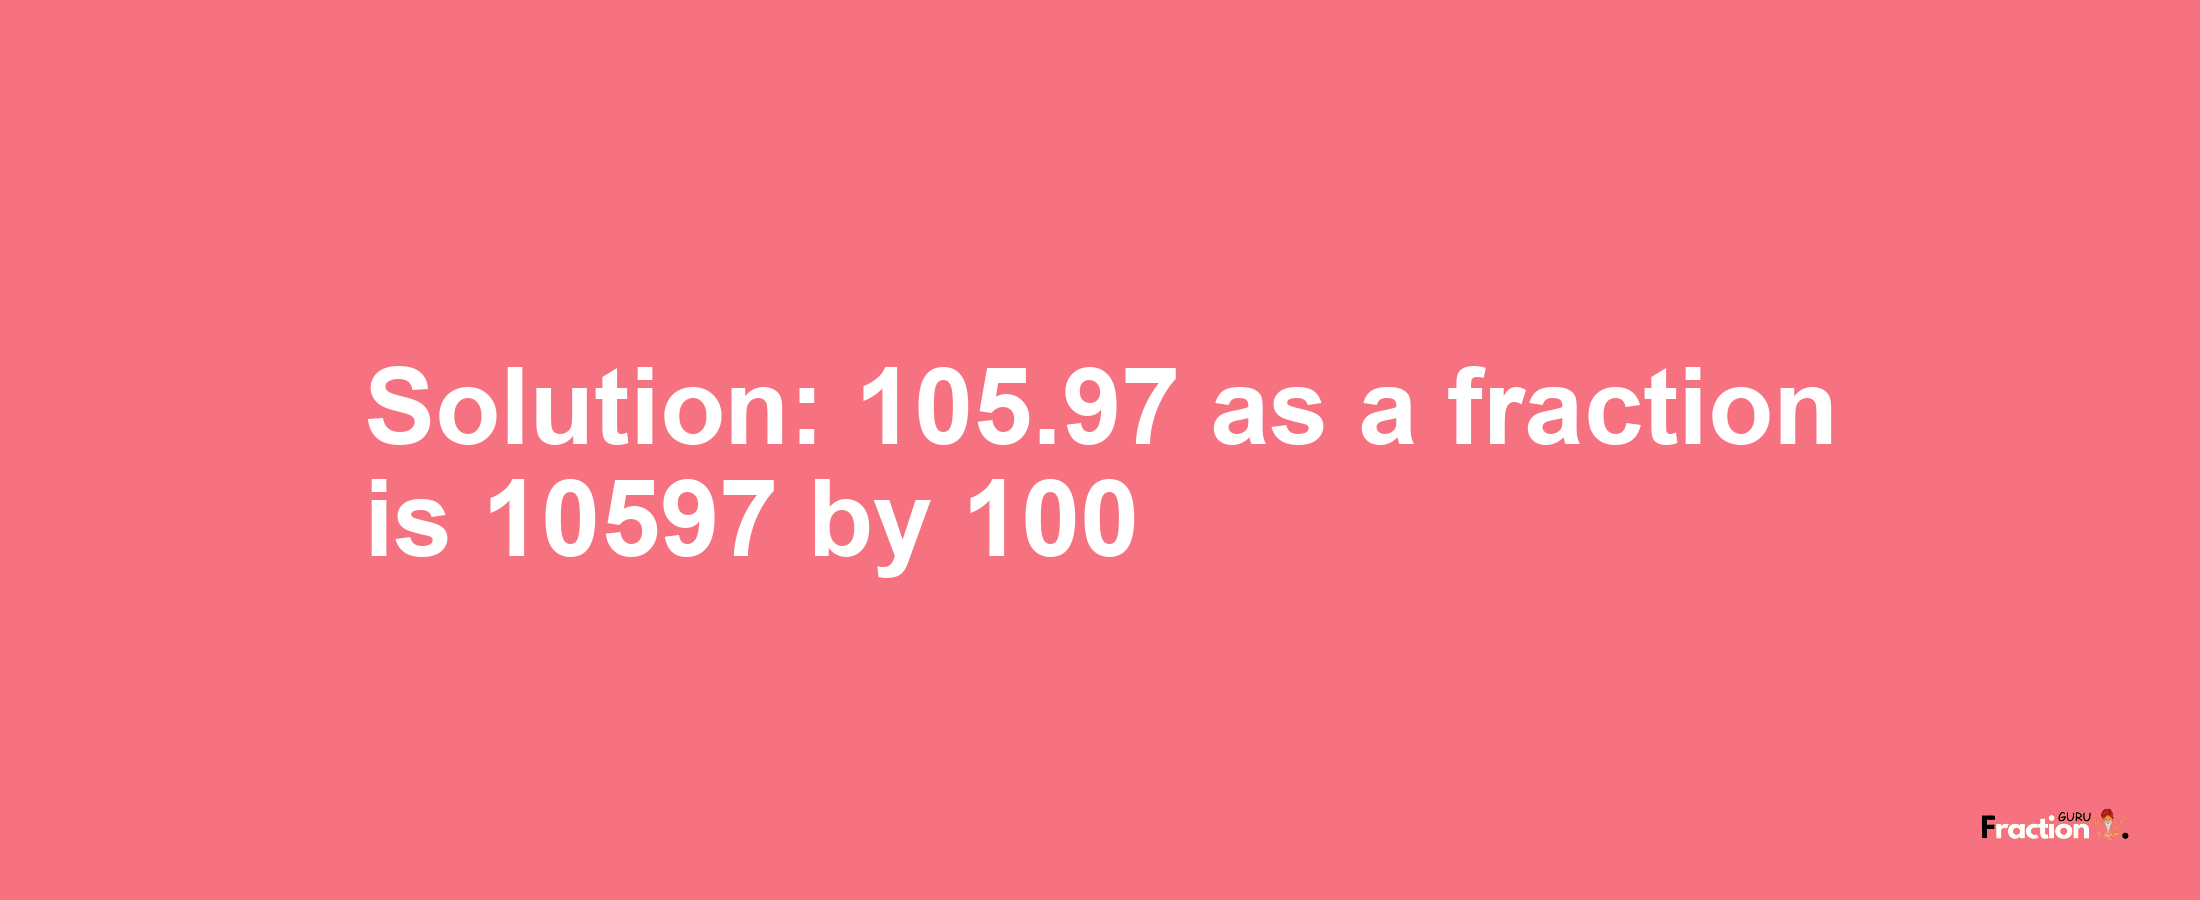 Solution:105.97 as a fraction is 10597/100